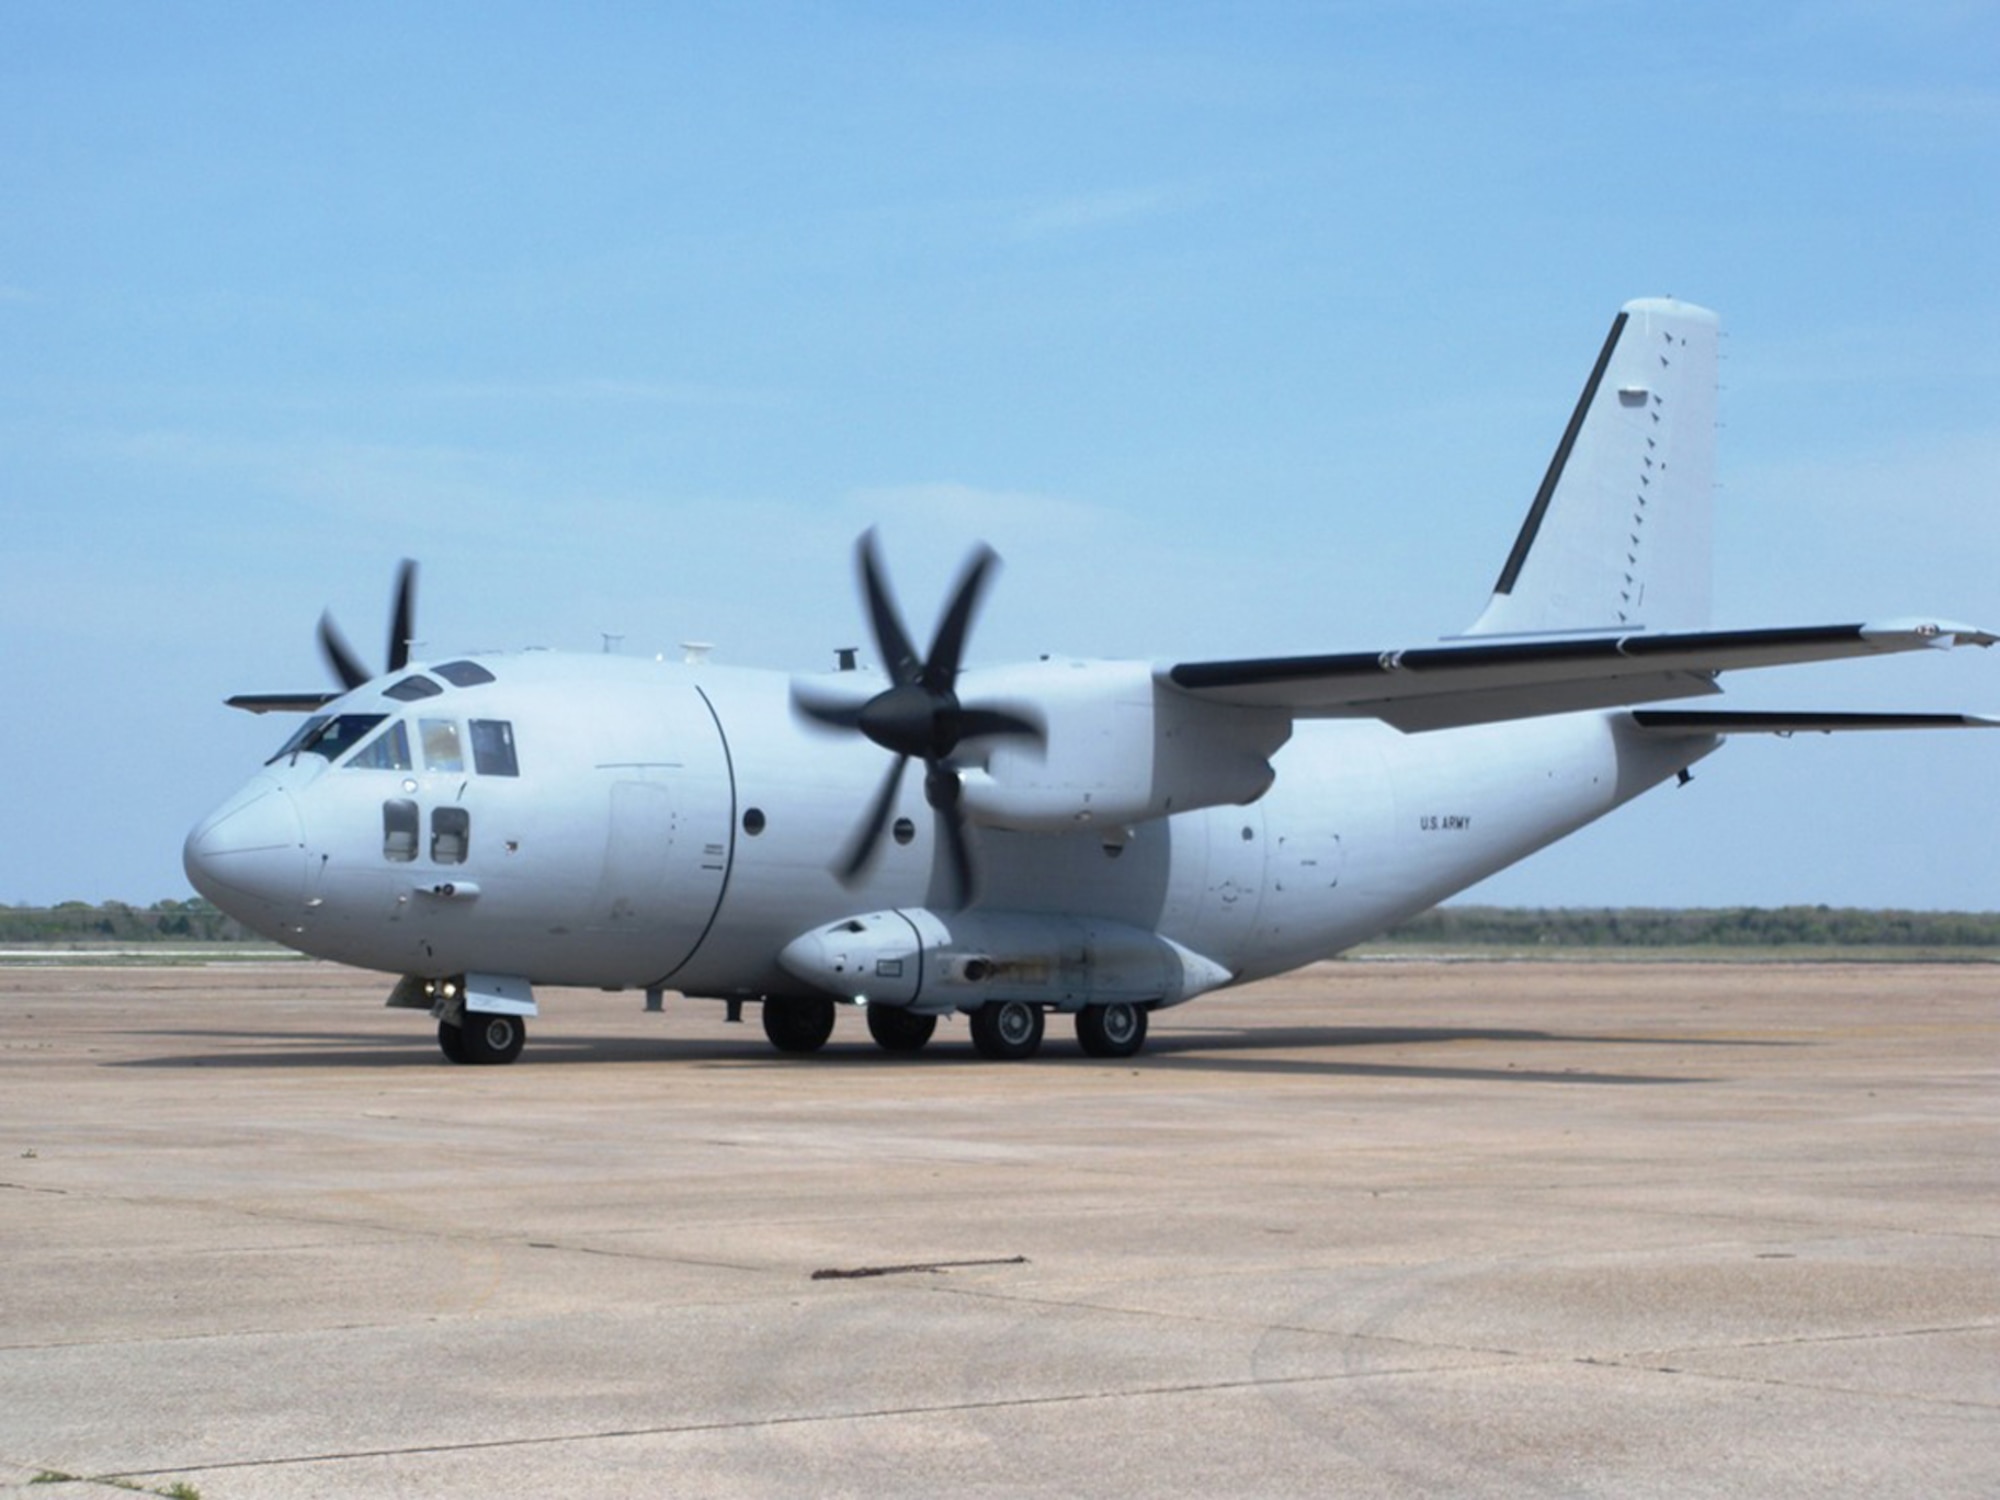 A C-27J Spartan taxis on the ramp at Redstone Arsenal, Ala., during flight testing in early 2009. Air Force officials plan to add 38 C-27Js to its inventory, which will be operated by the Air National Guard. (U.S. Air Force photo)